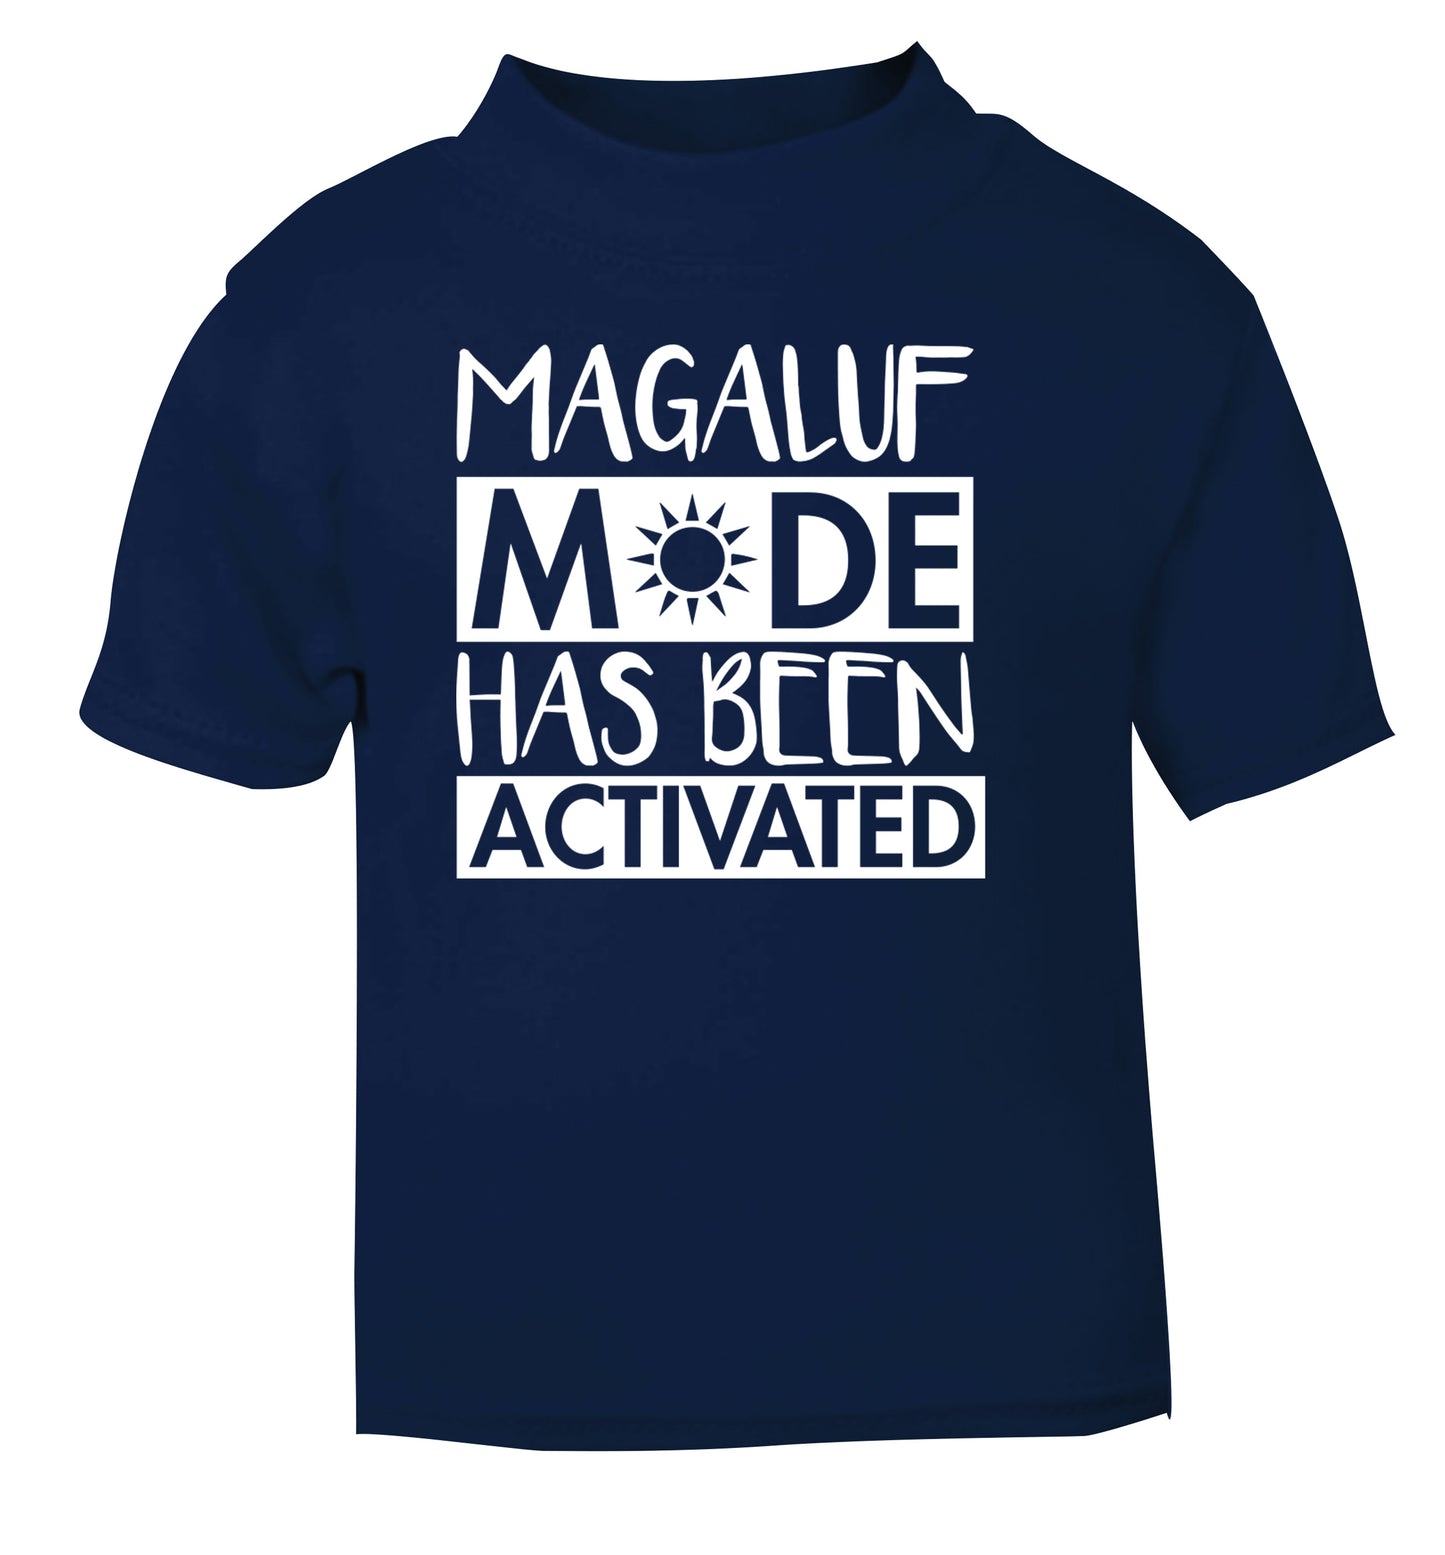 Magaluf mode has been activated navy Baby Toddler Tshirt 2 Years